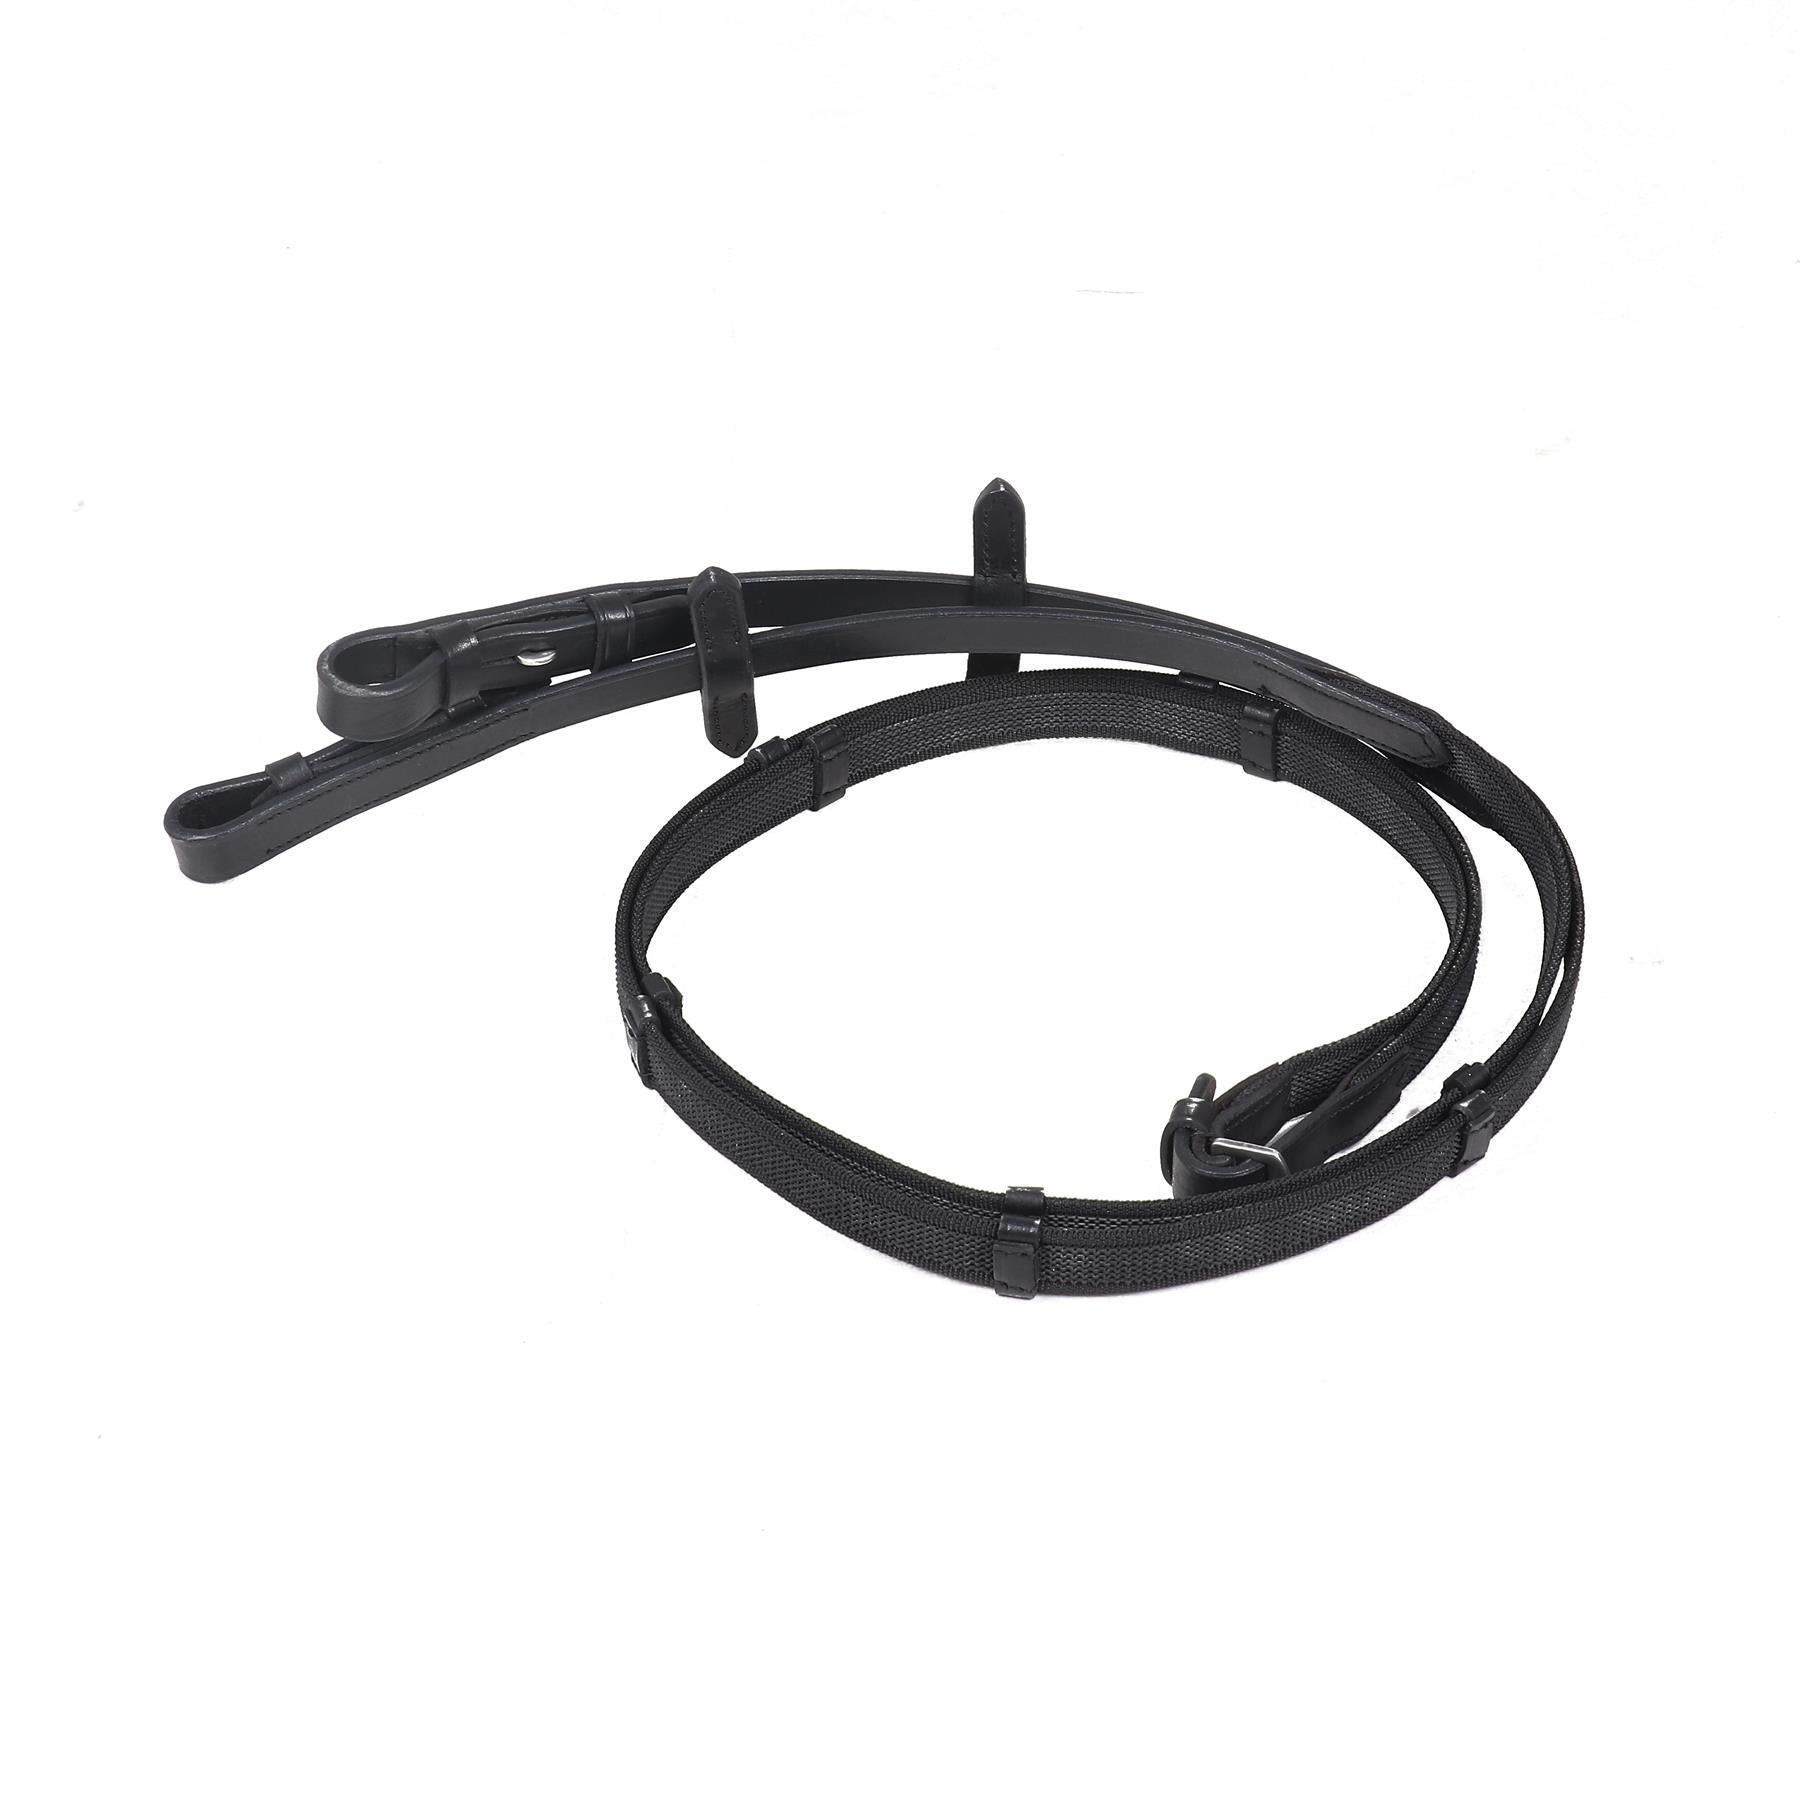 Super grip Leather Anti Slip Reins Continental Web Hand Stop Black Brown 3 Sizes - Tack24